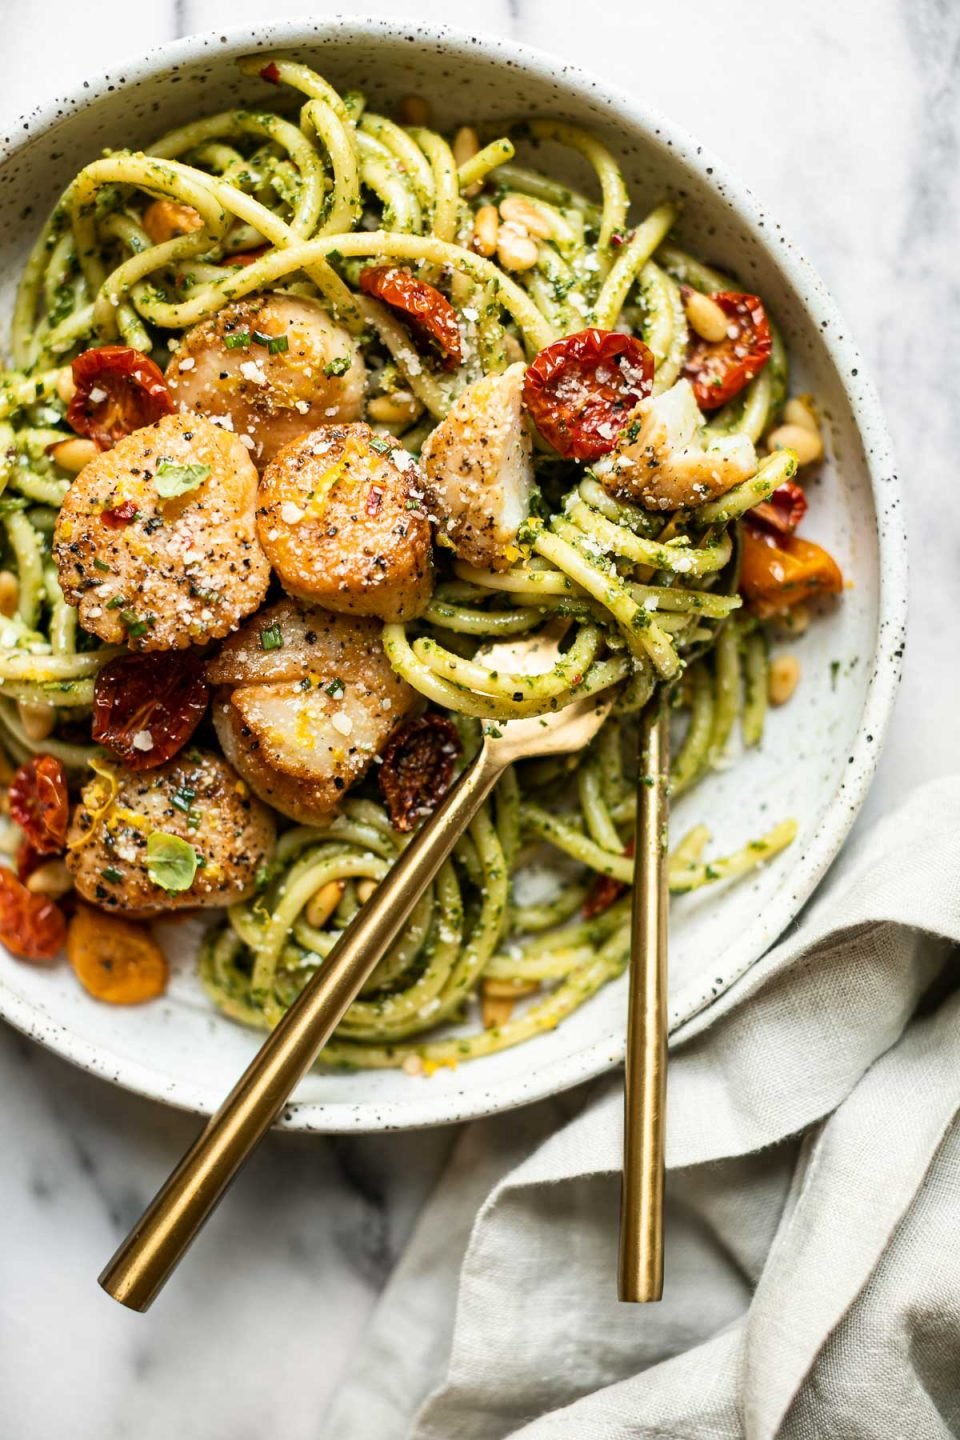 Seared Scallops and Kale Pesto pasta in a black & white speckled pasta bowl. A gold fork & spoon rests inside the bowl & is tucked into the pasta ready to serve. The bowl sits on a grey and white marble surface. A light grey linen napkin is tucked under the platter in the foreground.